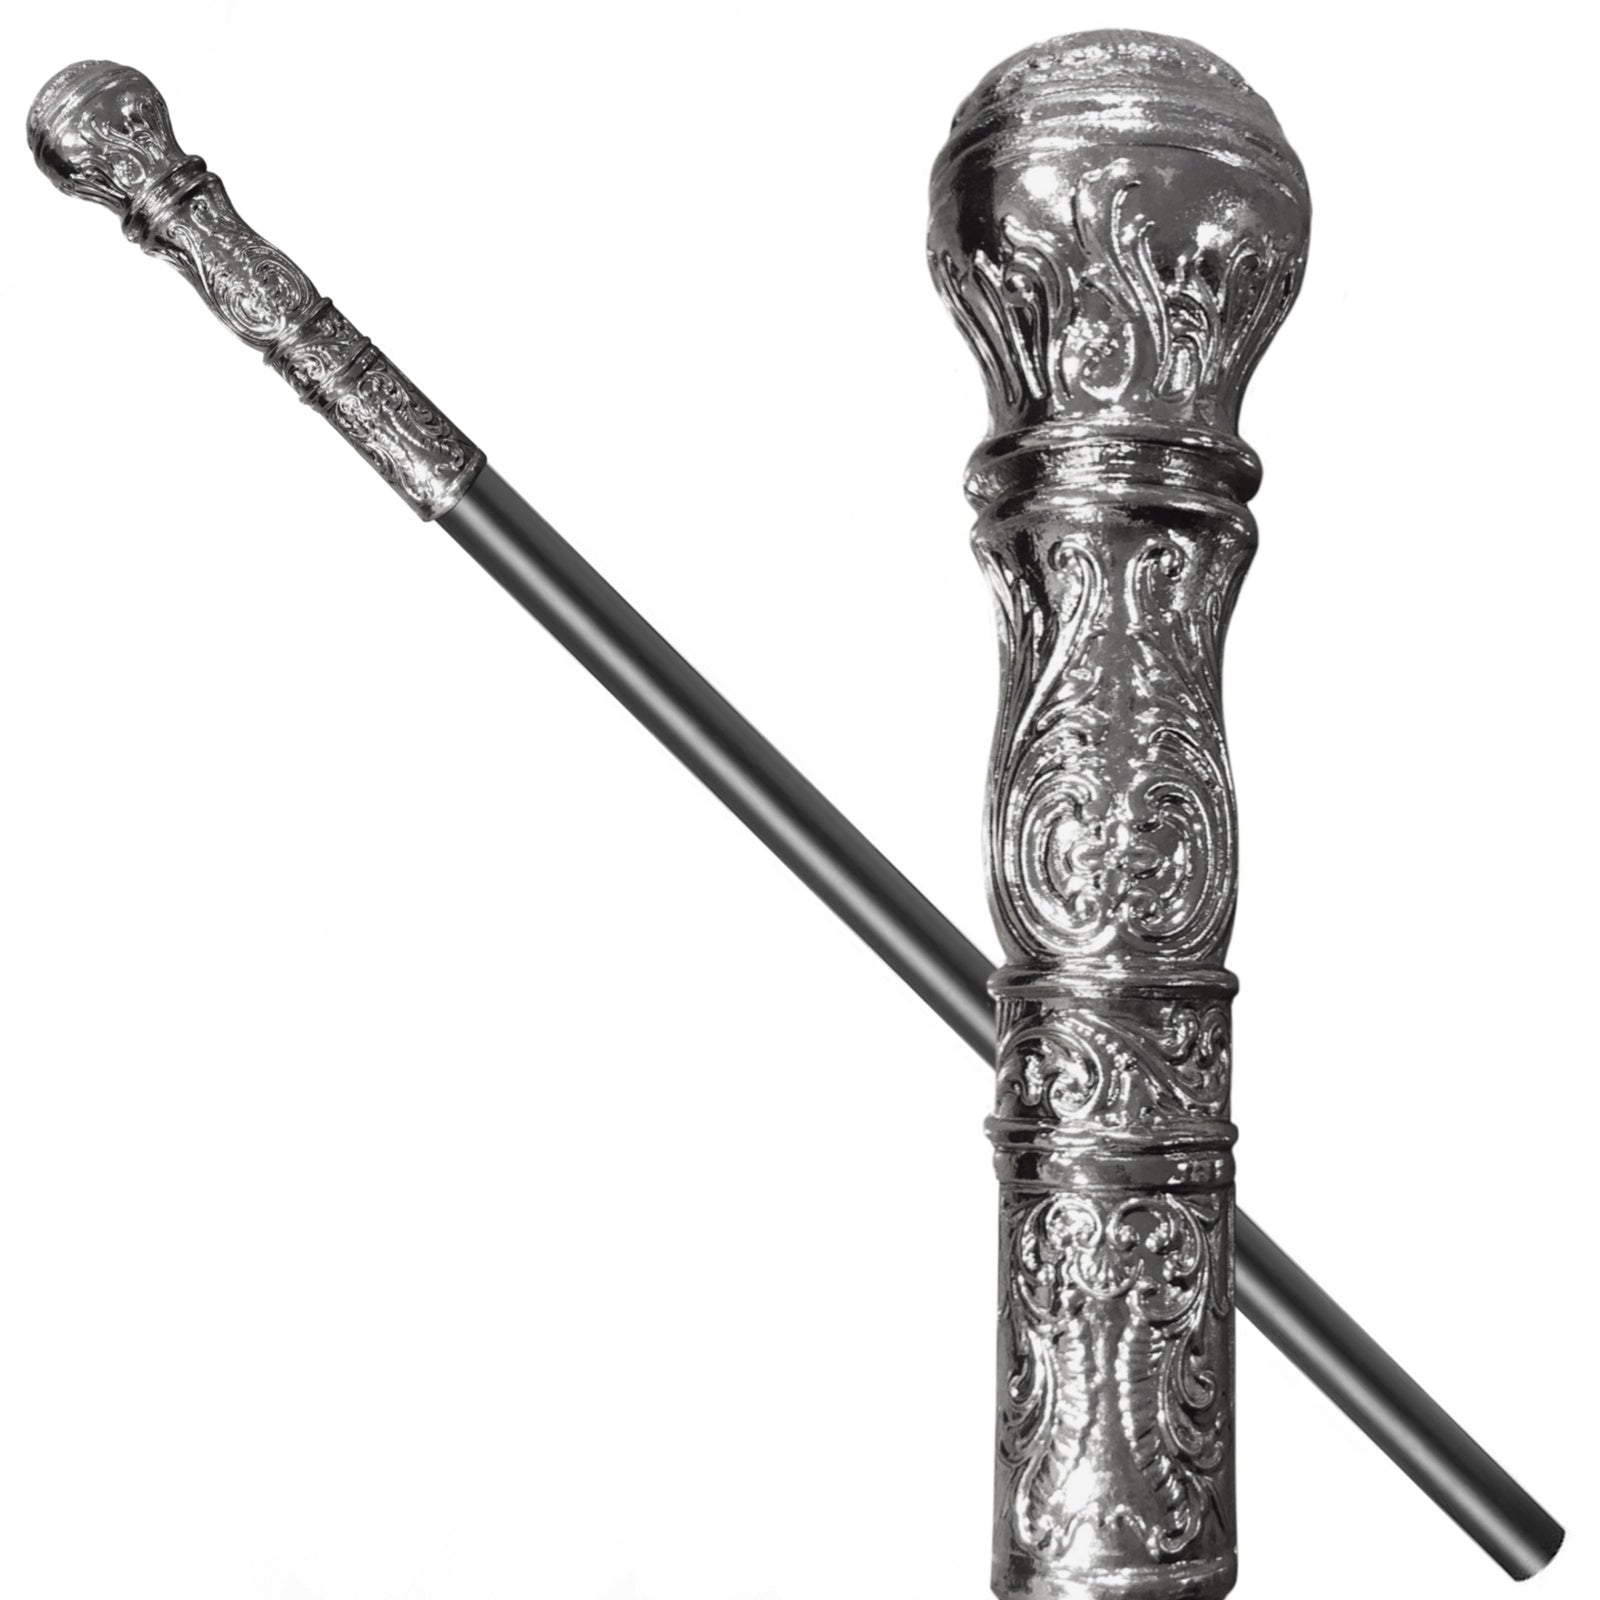 Stage/Dance Collapsible Silver Cane